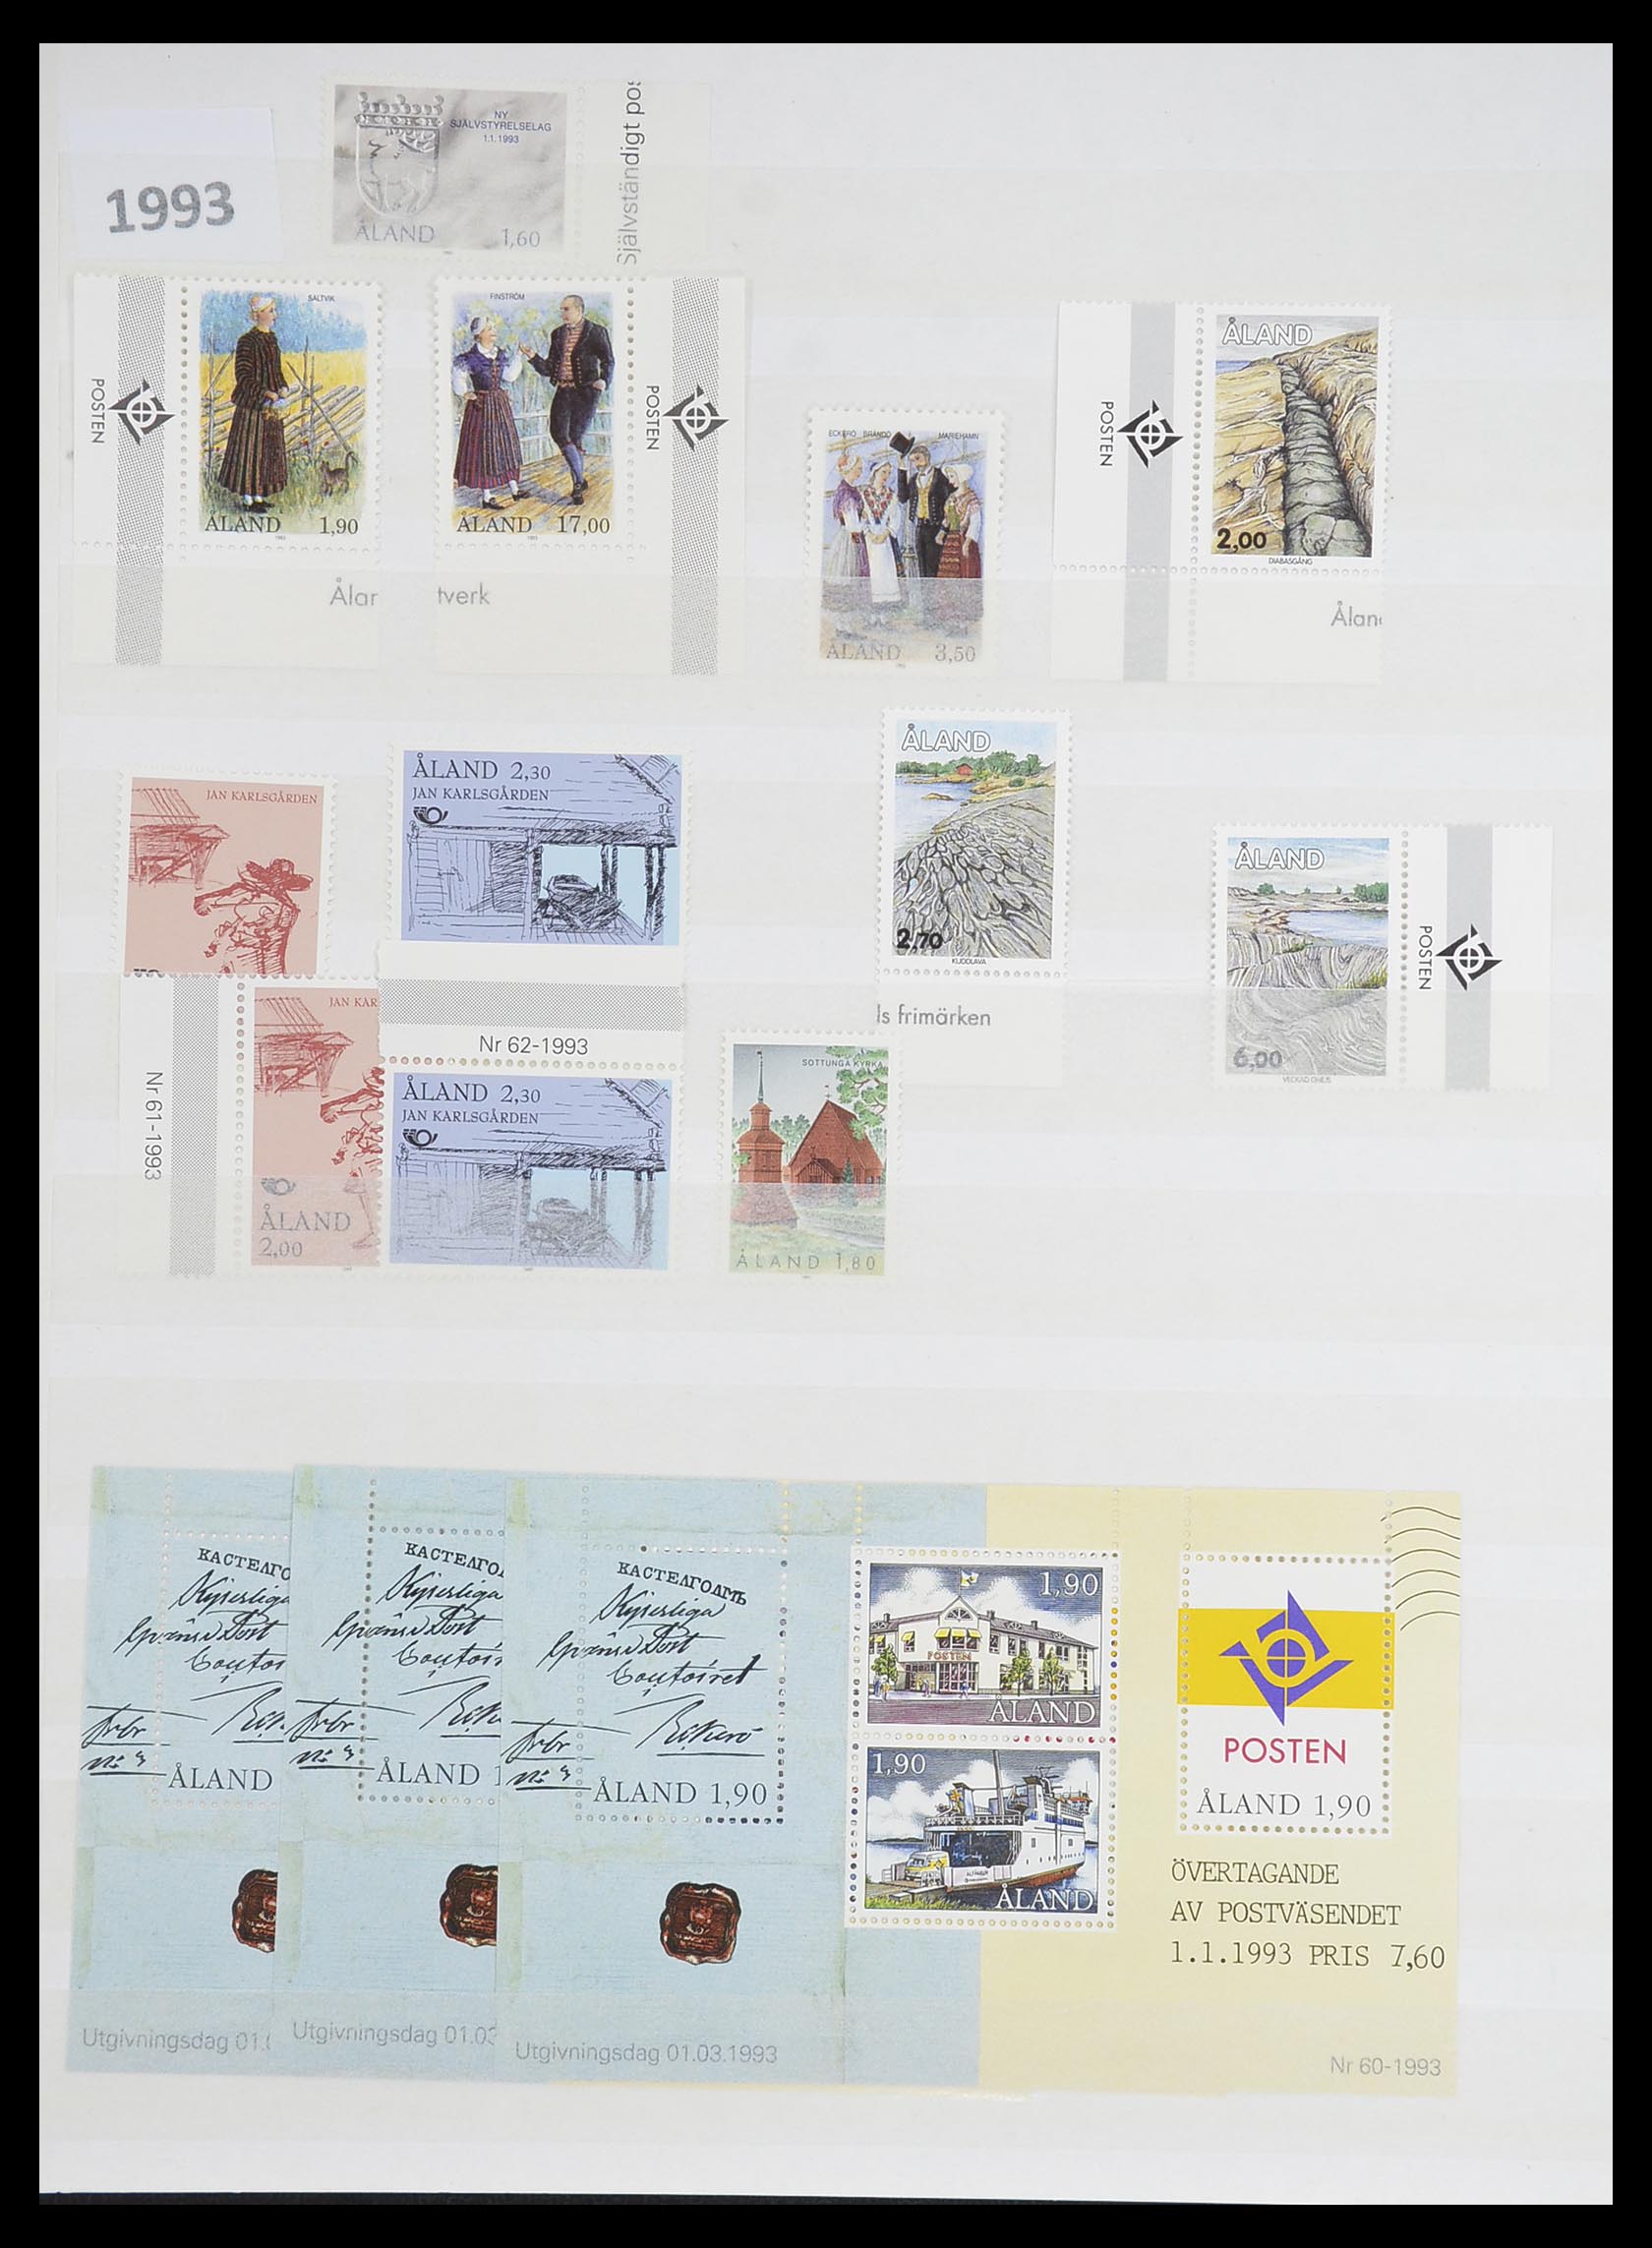 33726 010 - Stamp collection 33726 Scandinavia up to 2006.